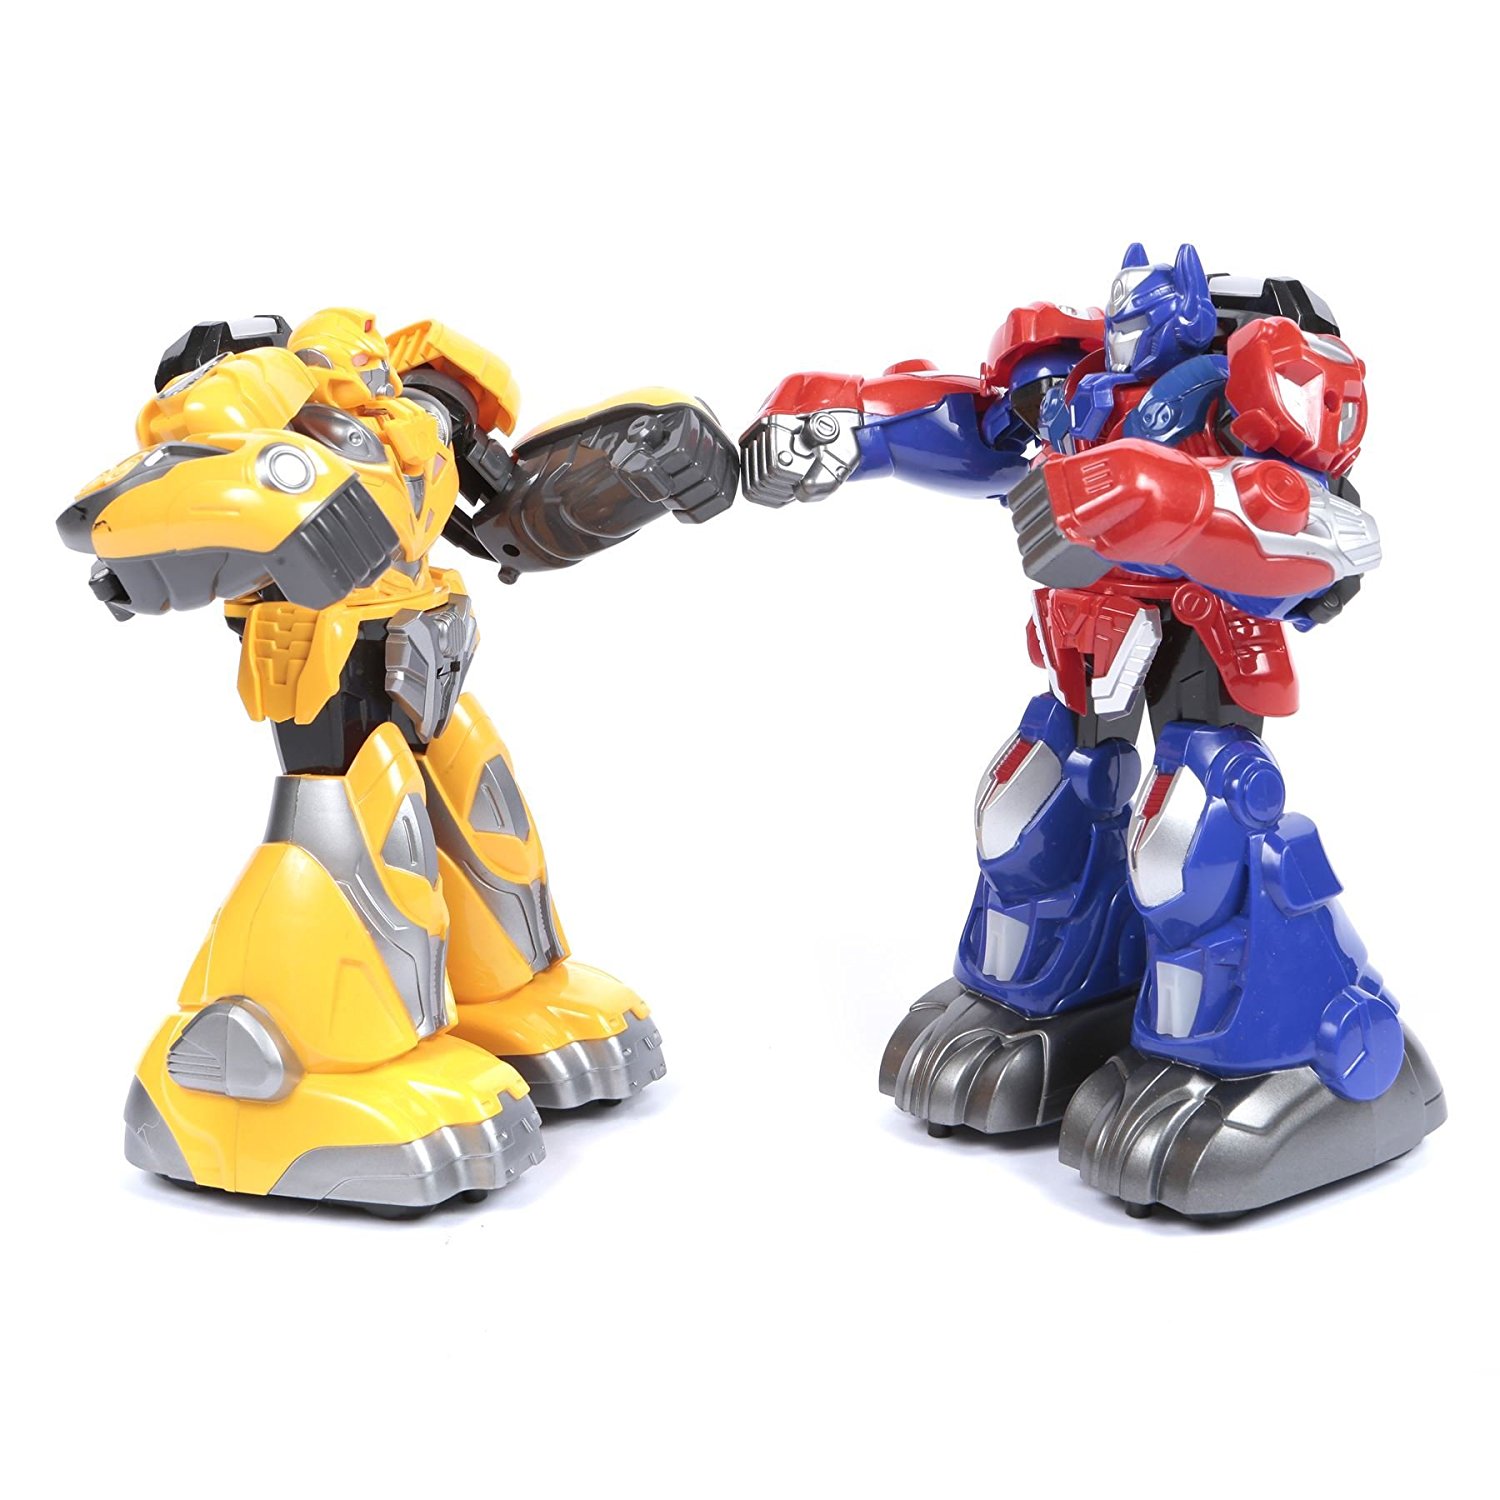 Gizmo Toy: Fighting Battle Robots Interactive ( 2 Robots) KD-8813